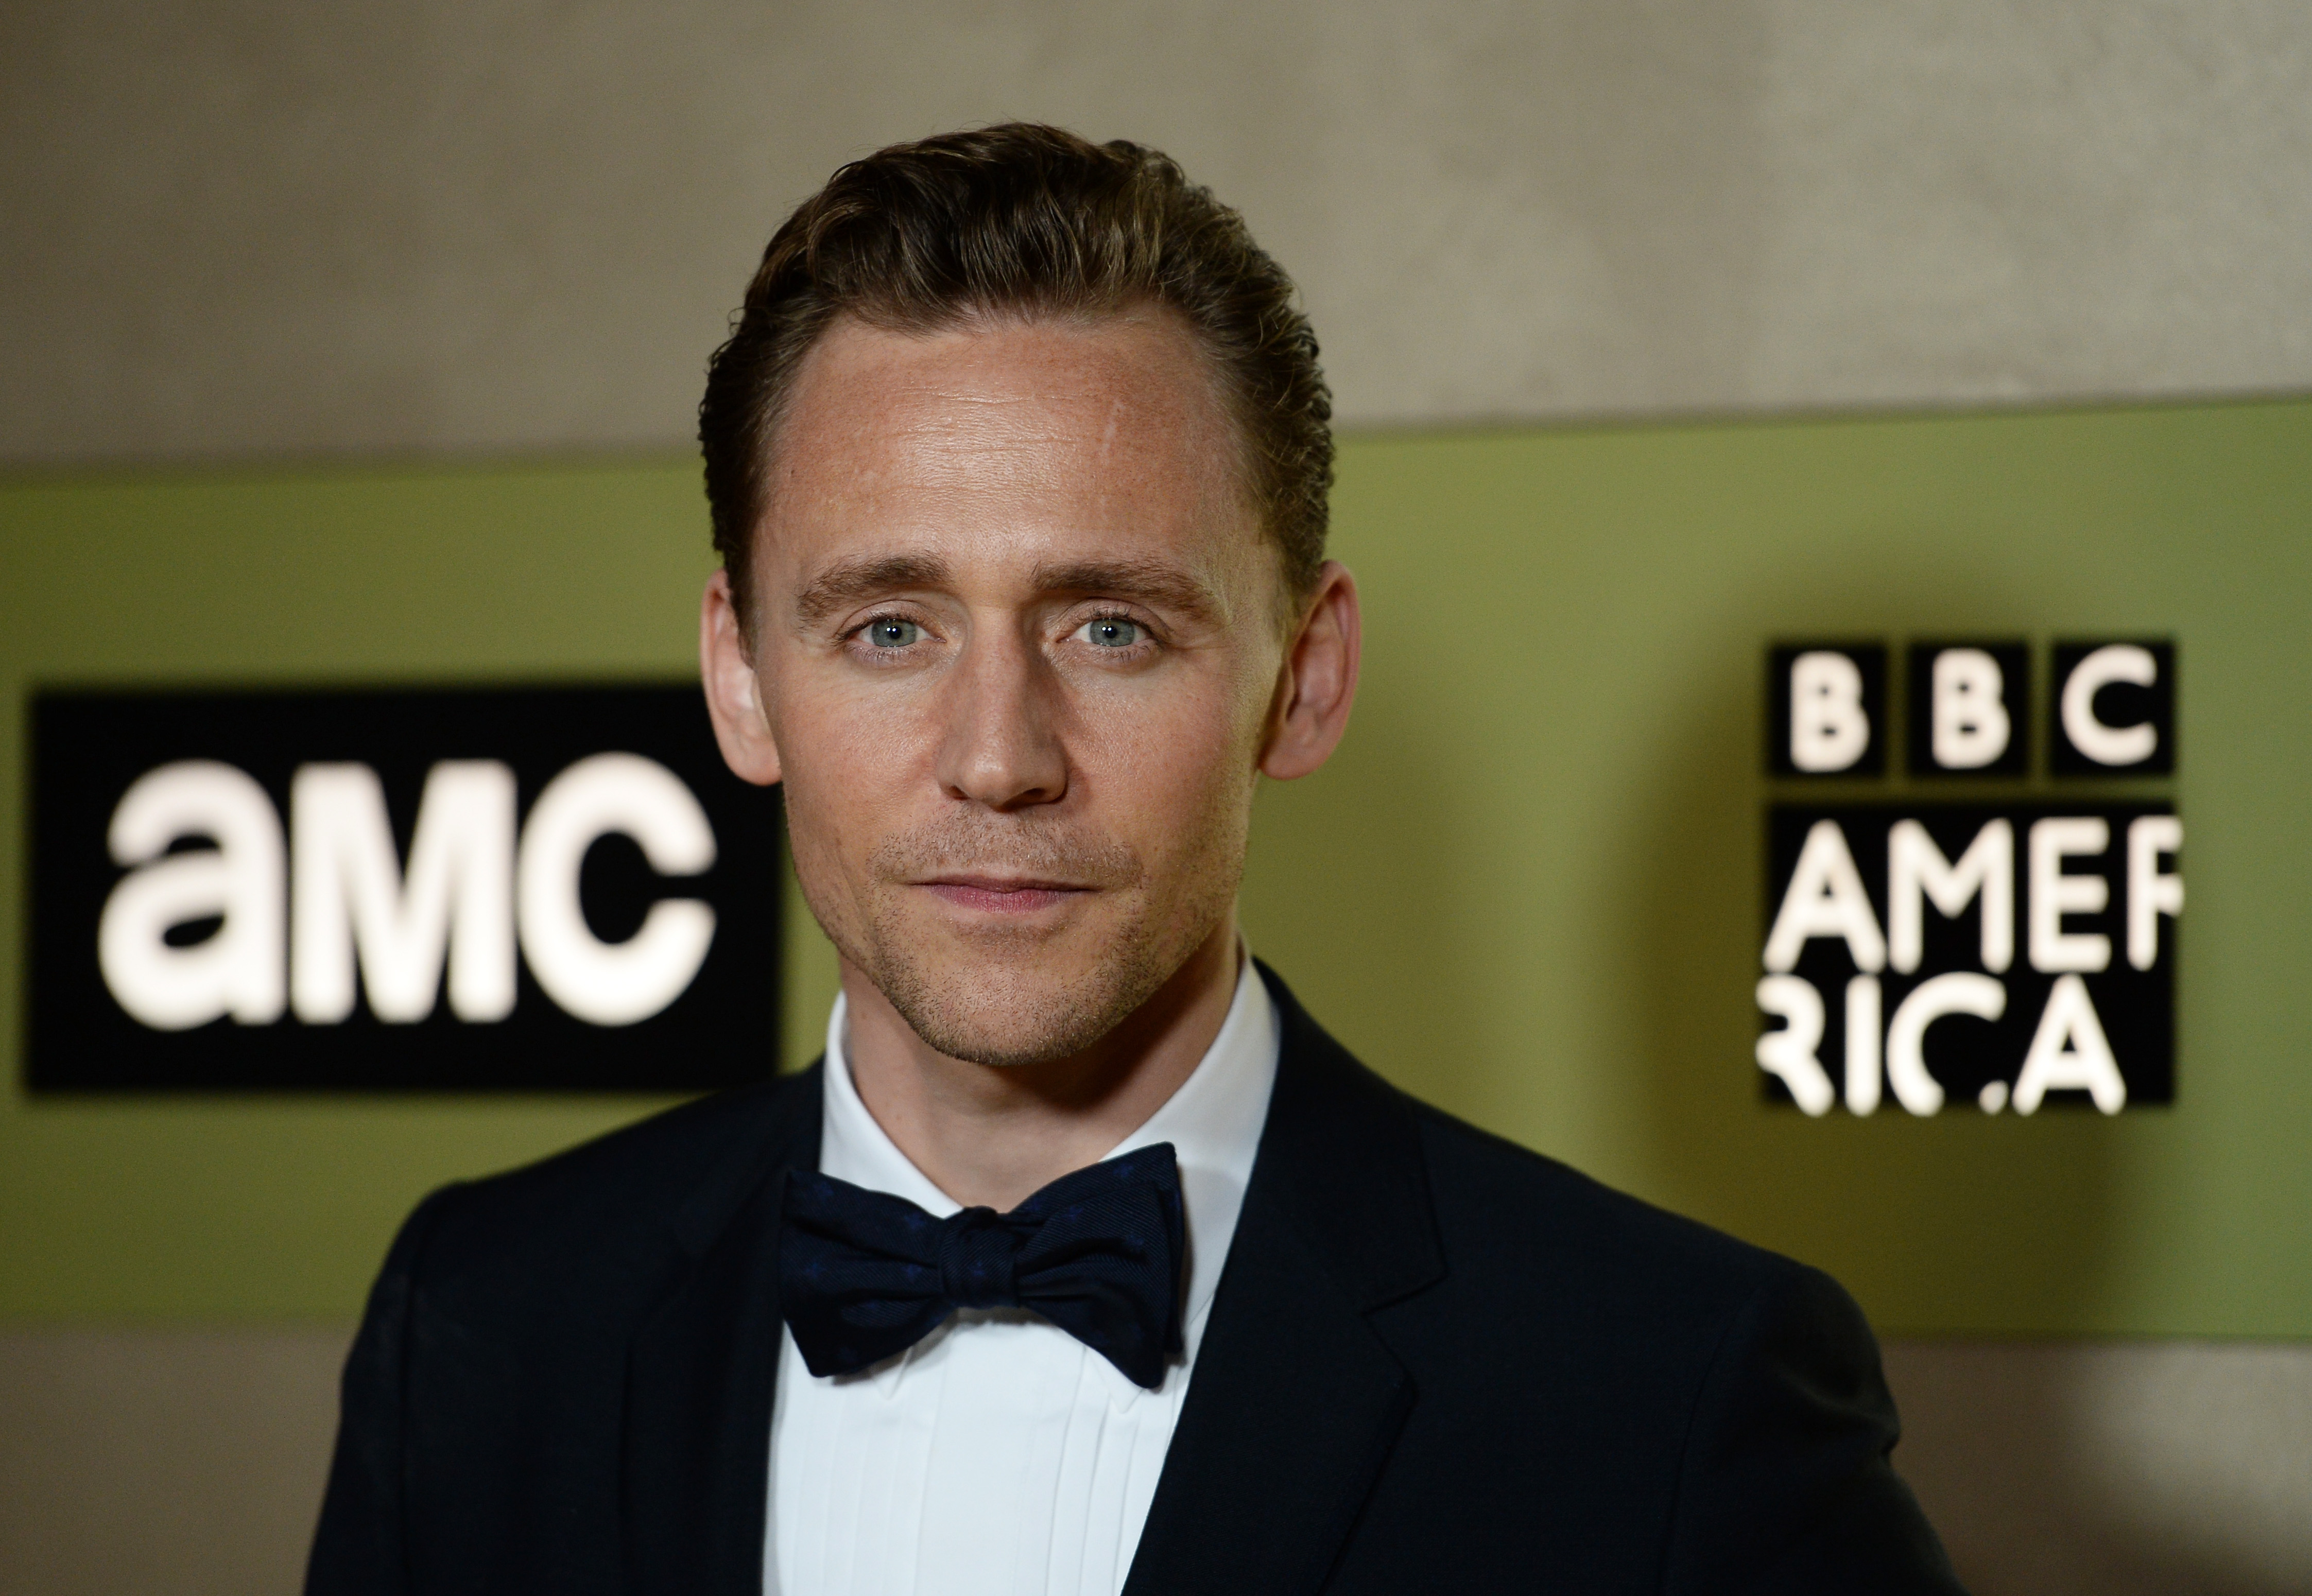 Actor Tom Hiddleston arrives at the AMC Networks' 68th Primetime Emmy Awards After-Party Celebration at BOA Steakhouse on September 18, 2016 in West Hollywood, California. (Amanda Edwards&mdash;WireImage/Getty Images)